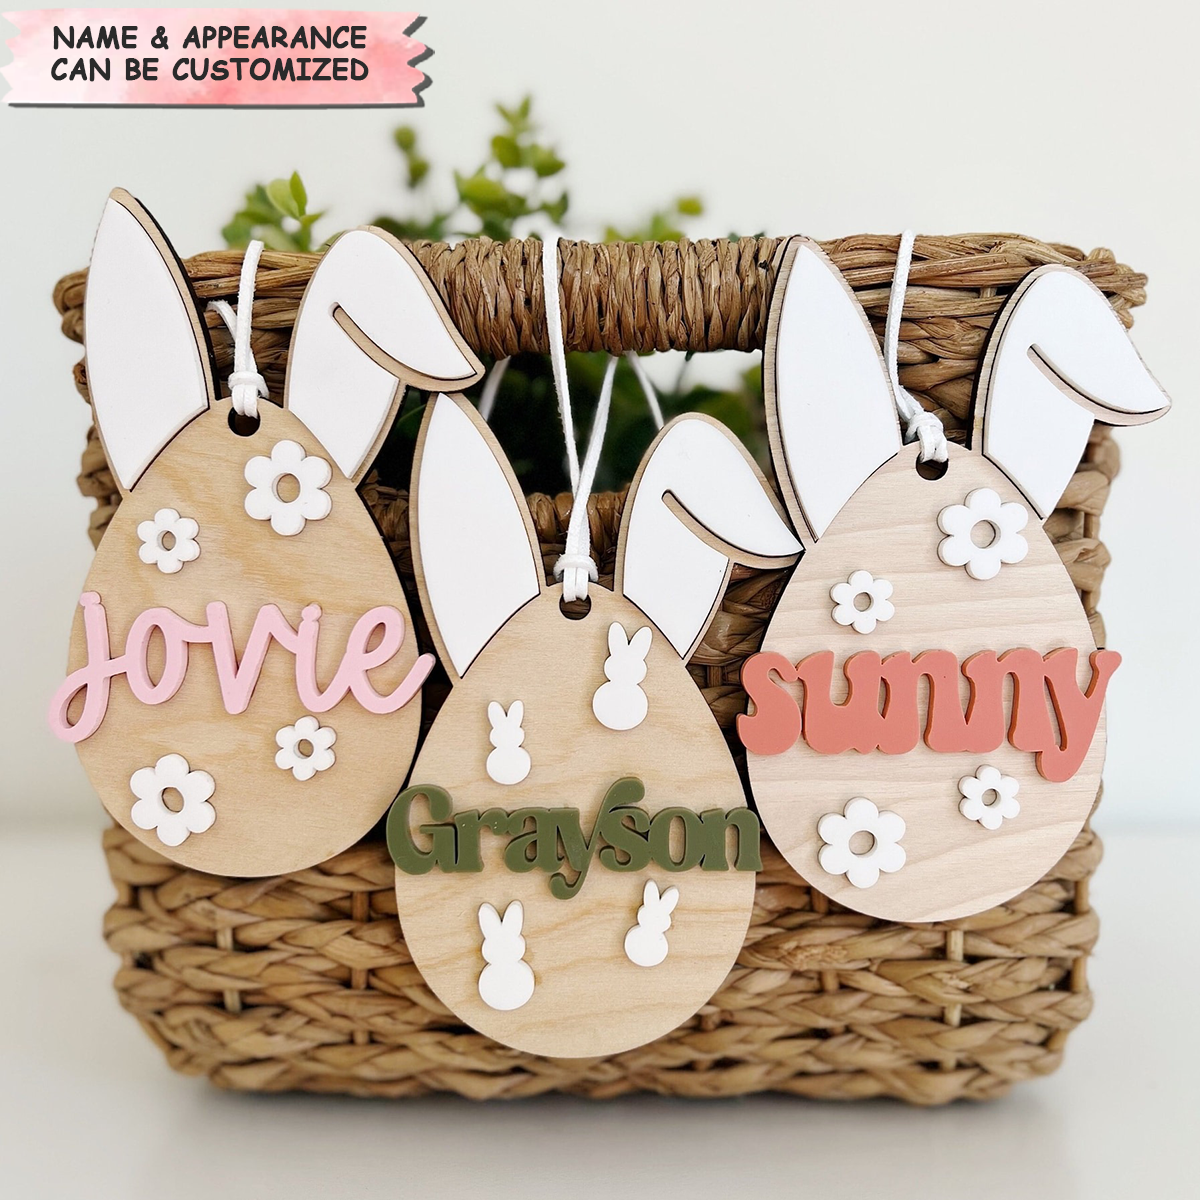 Floral Egg - Personalized Custom 2 Layer Basket Tag - Easter Gift For Family Members, Grandma, Mom